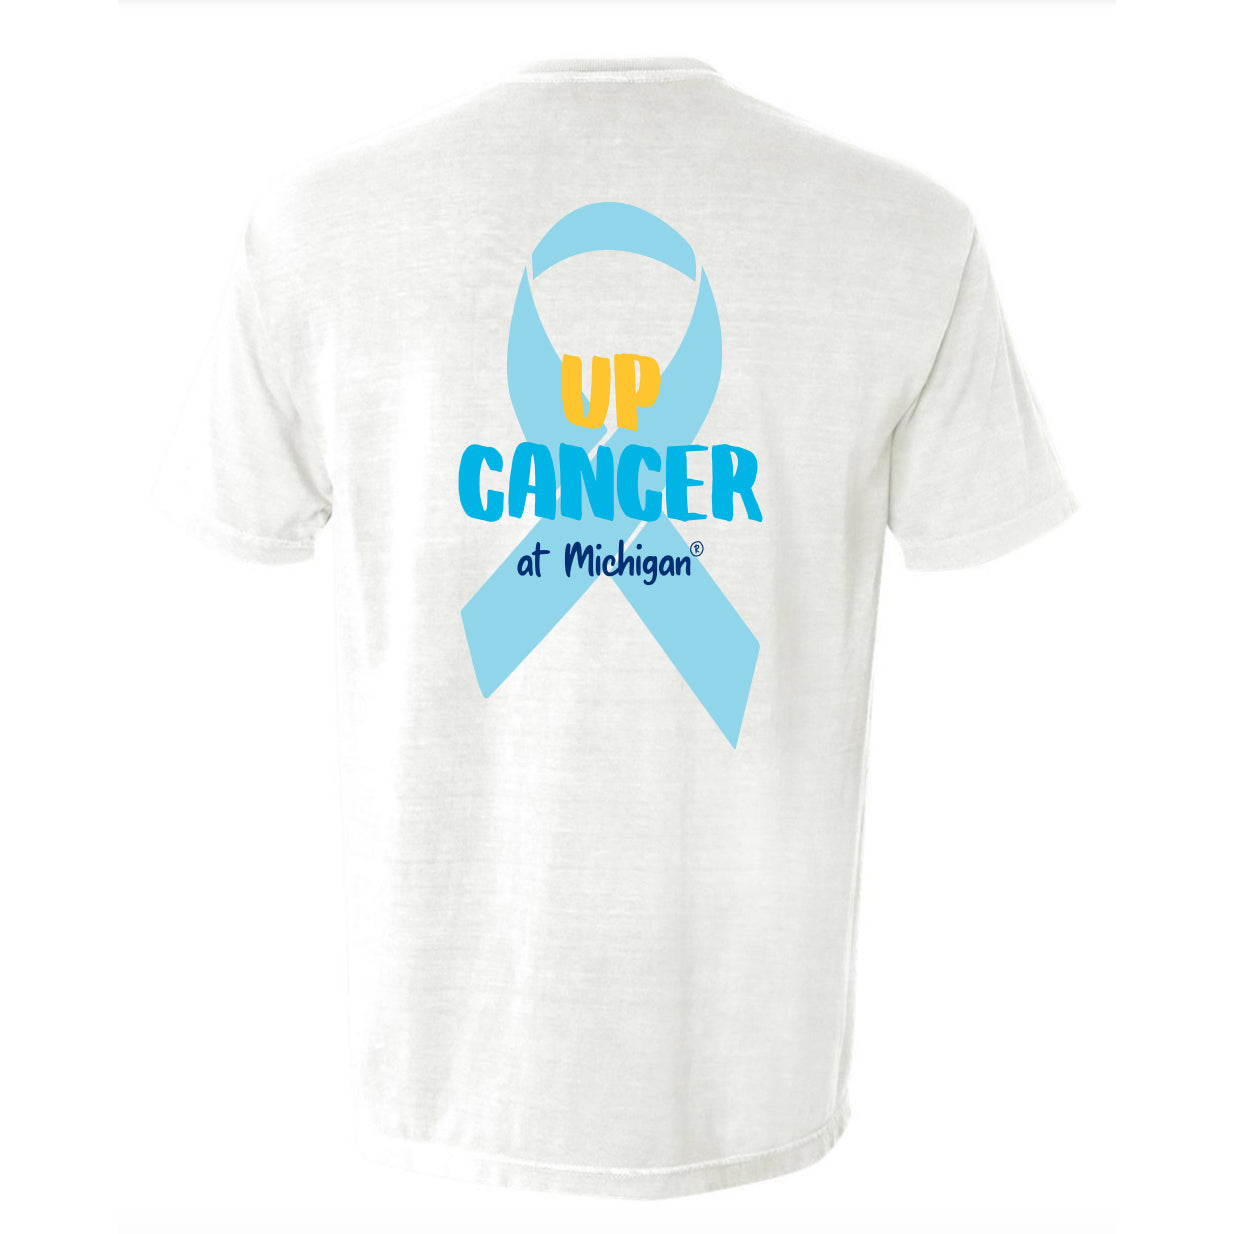 Up Cancer White Shirt (Listing ID: 6582483812421)